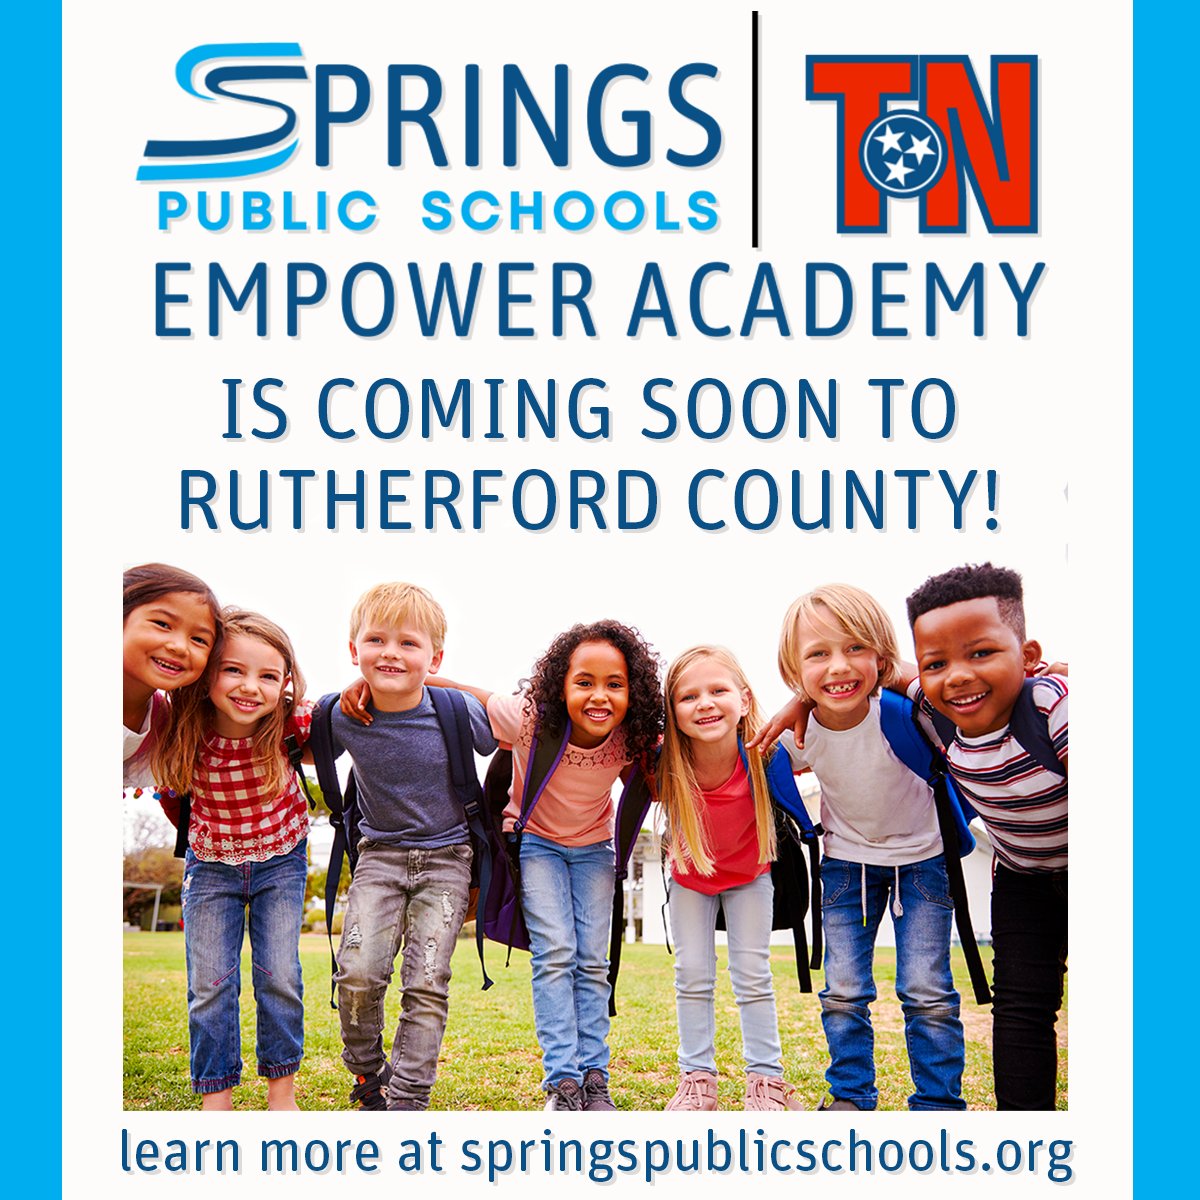 Congrats to @SpringsCS on being approved to bring a K-8, tuition-free public charter school to #RutherfordCo in fall 2023! Its Montessori-aligned curriculum focuses on the individual needs & interests of students. Learn more from @dnj_com: dnj.com/videos/news/20…